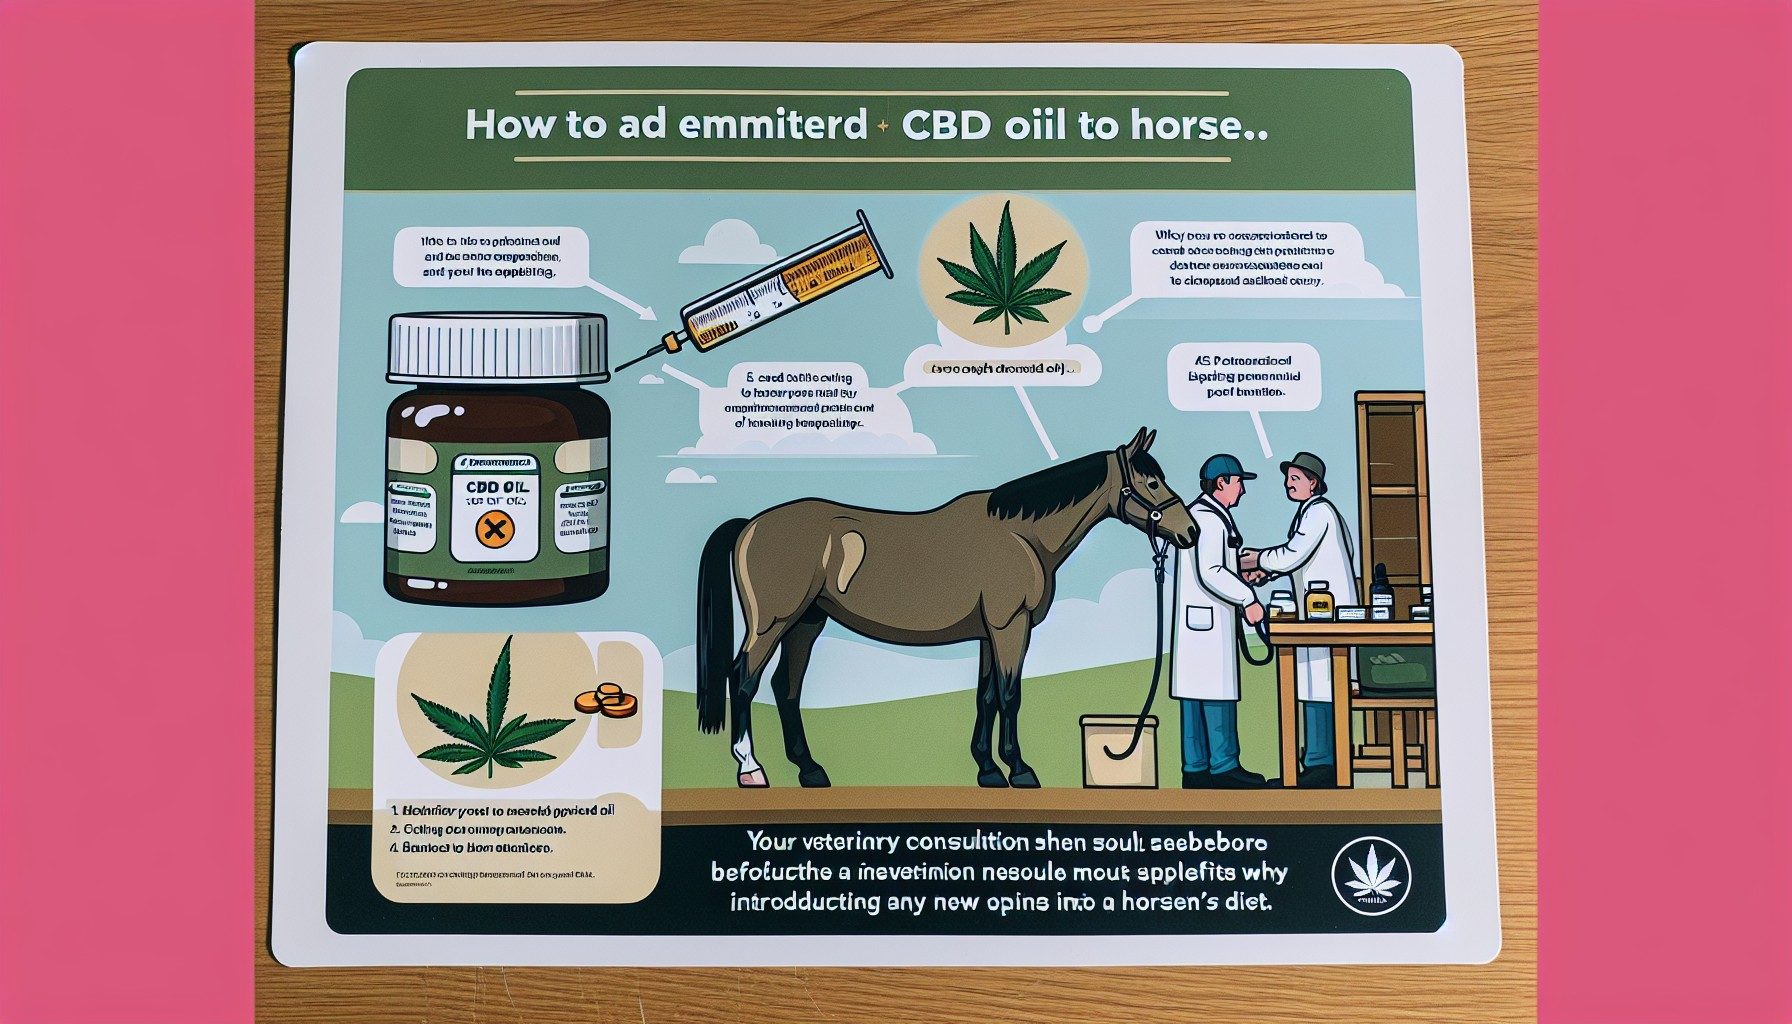 Horses: how and why to use CBD oil?